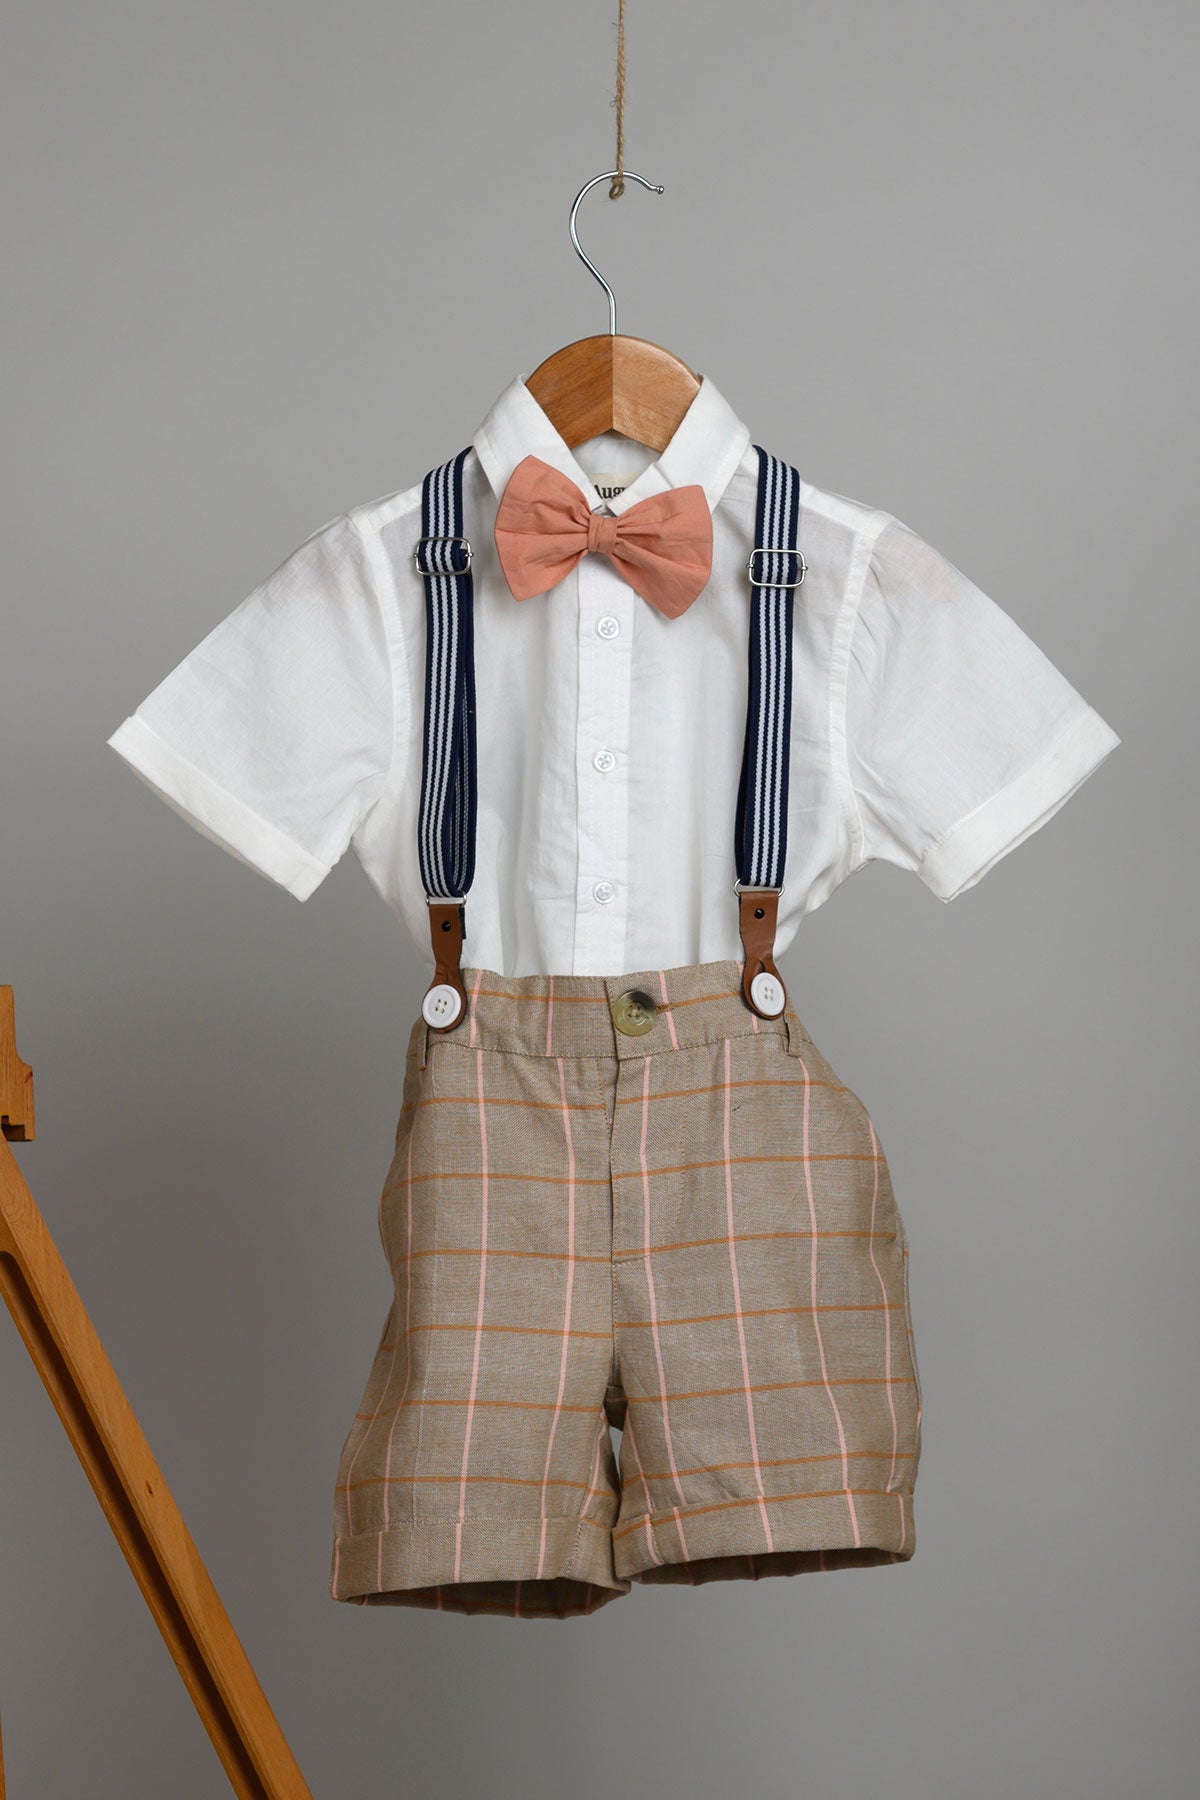 Bunny Shorts, Shirt, Bow and Suspenders Set - Brown